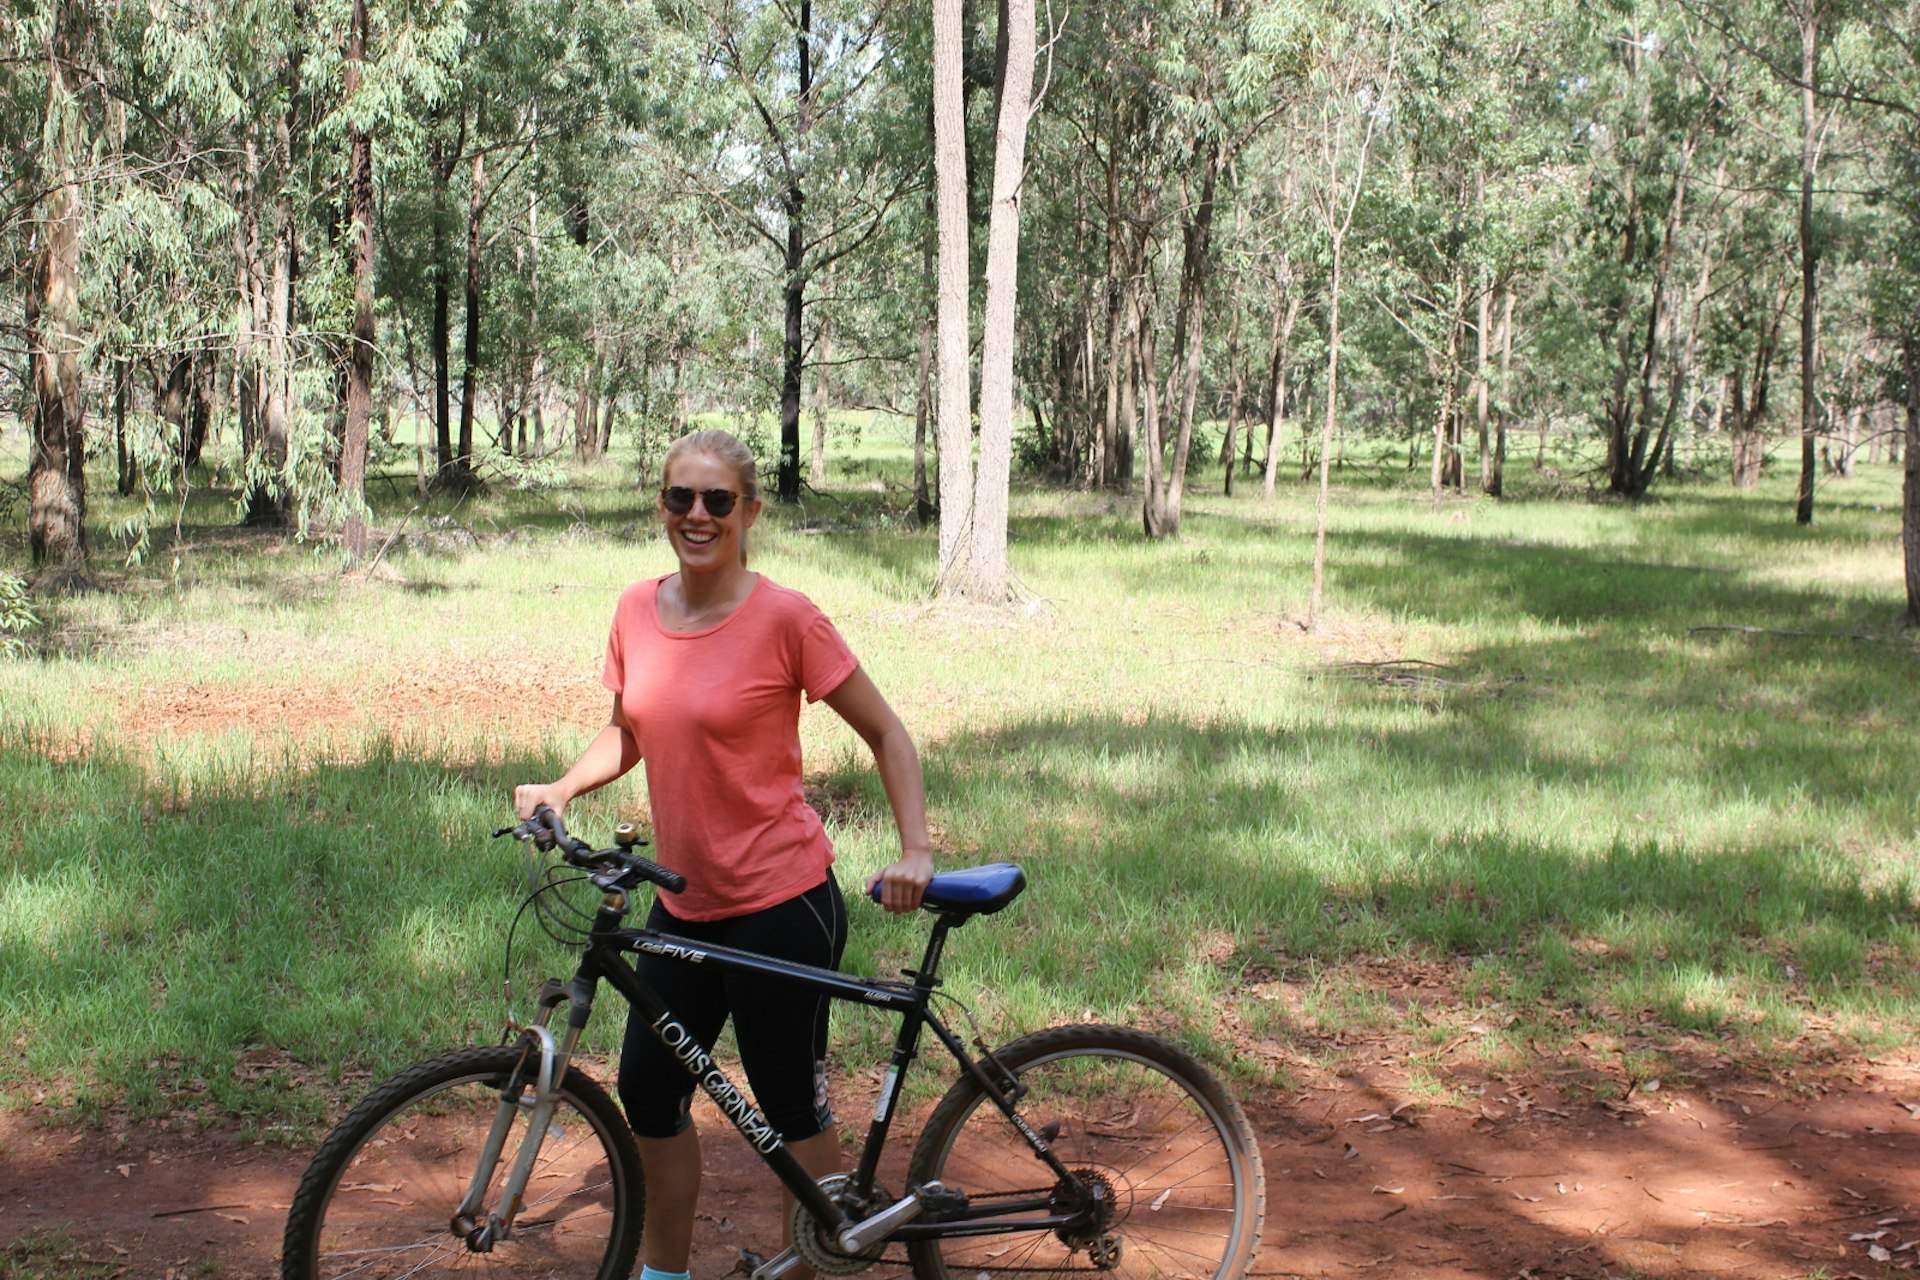 Writer Clementine Logan stands smiling behind her mountain bike on a red dirt trail within Kakura Forest, Nairobi© Clementine Logan / Lonely Planet